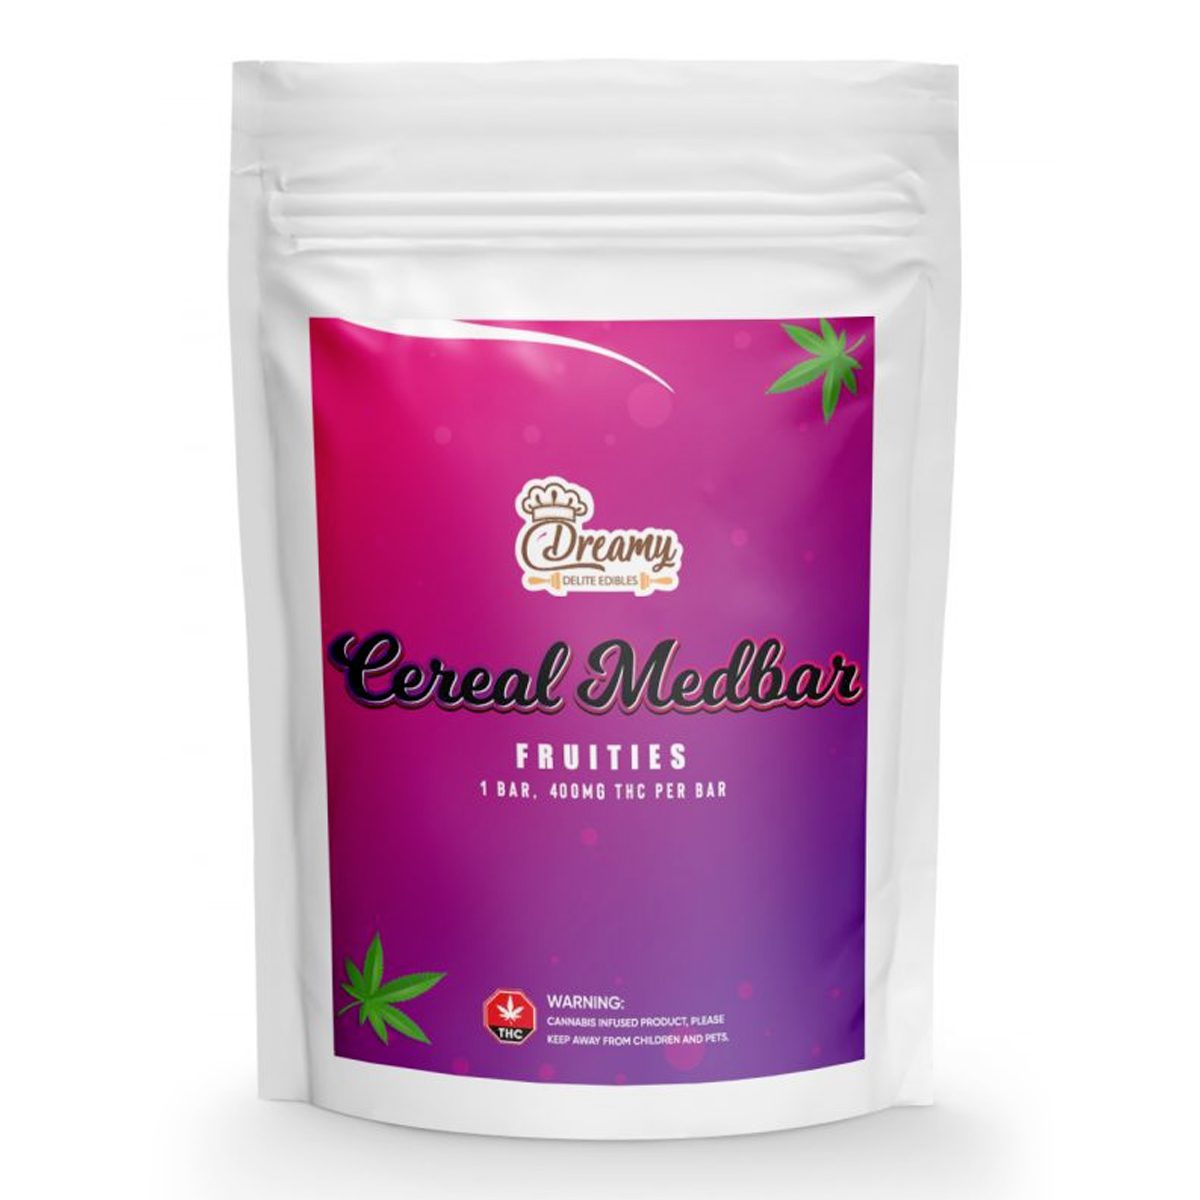 Buy Fruities Cereal Medbars 400mg THC By Dreamy Delite